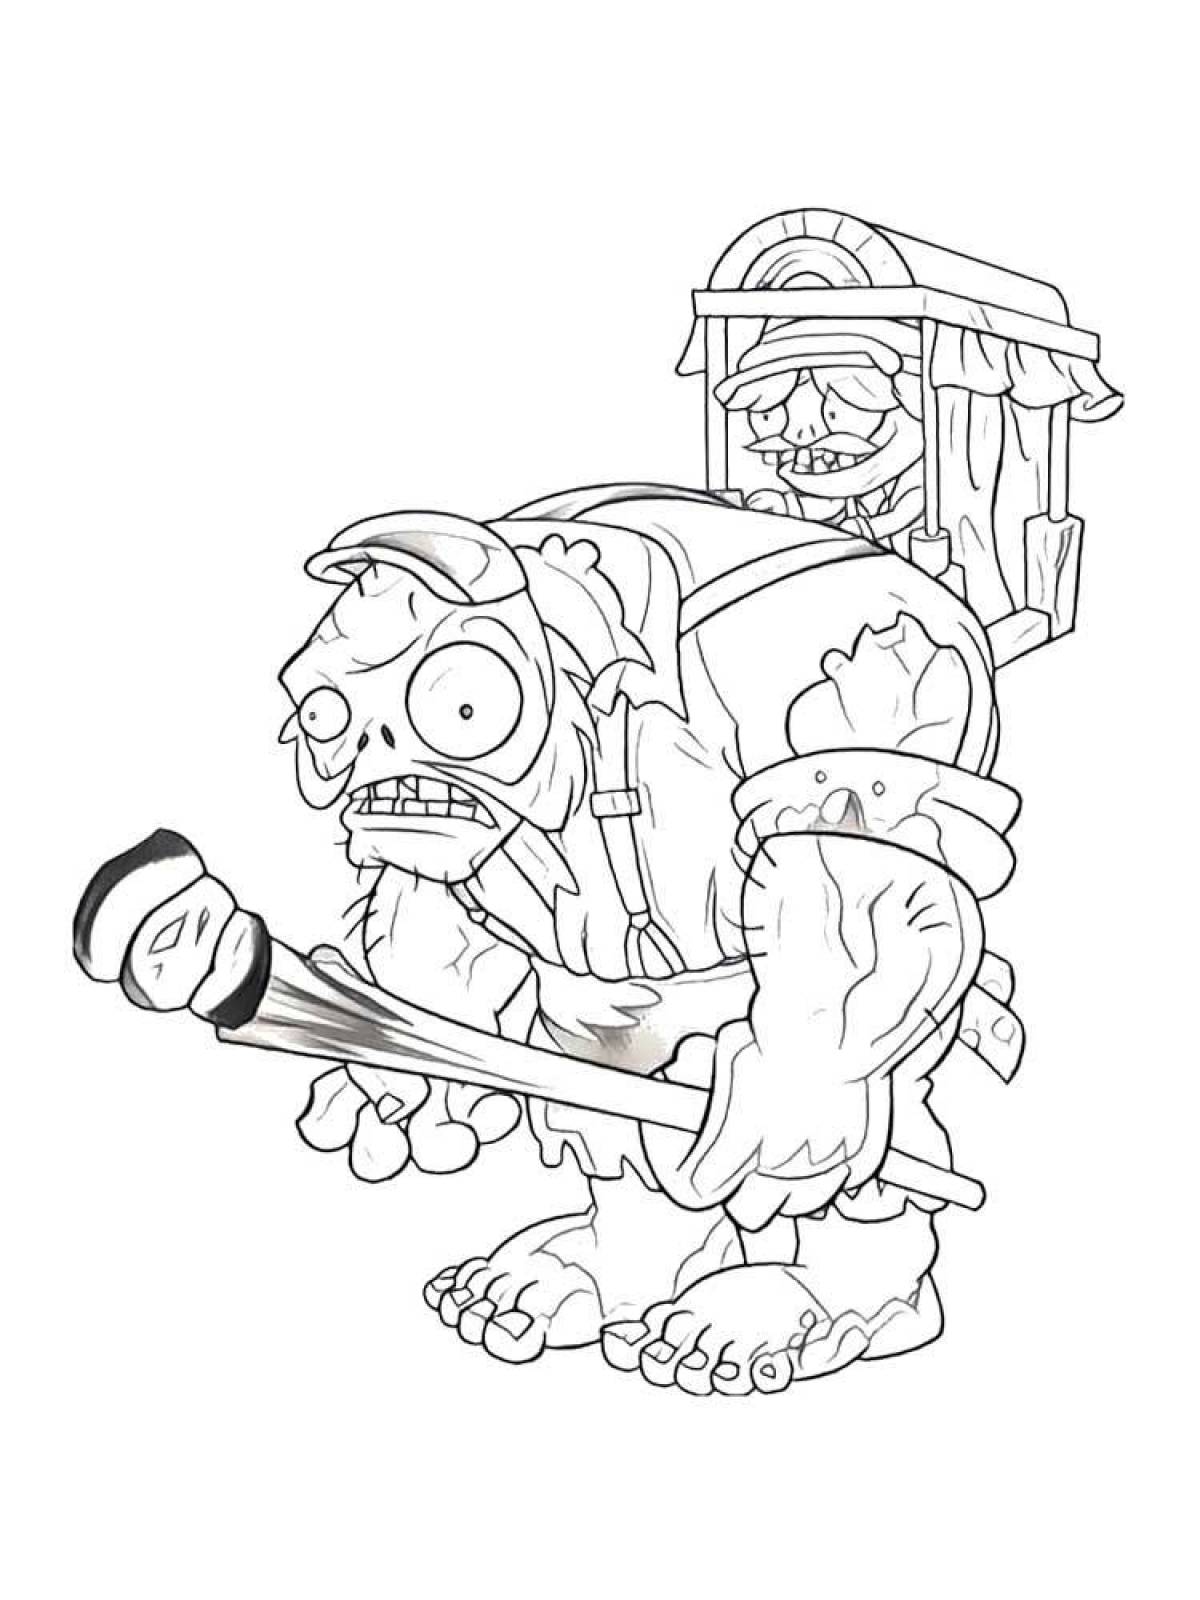 Entertaining plants vs zombies coloring book